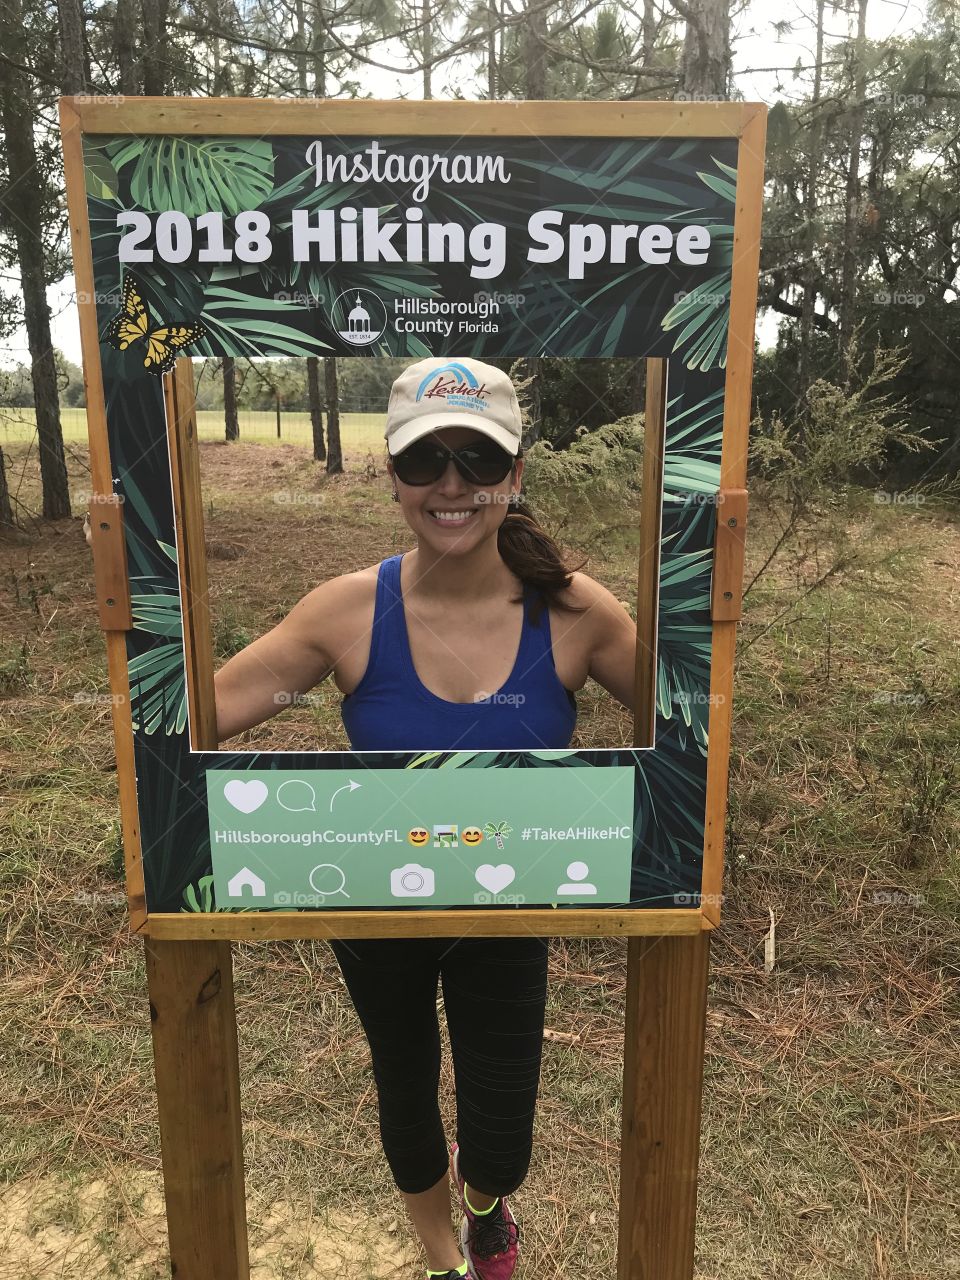 2018 Hiking spree!  Getting outside in this beautiful Florida winter day!  